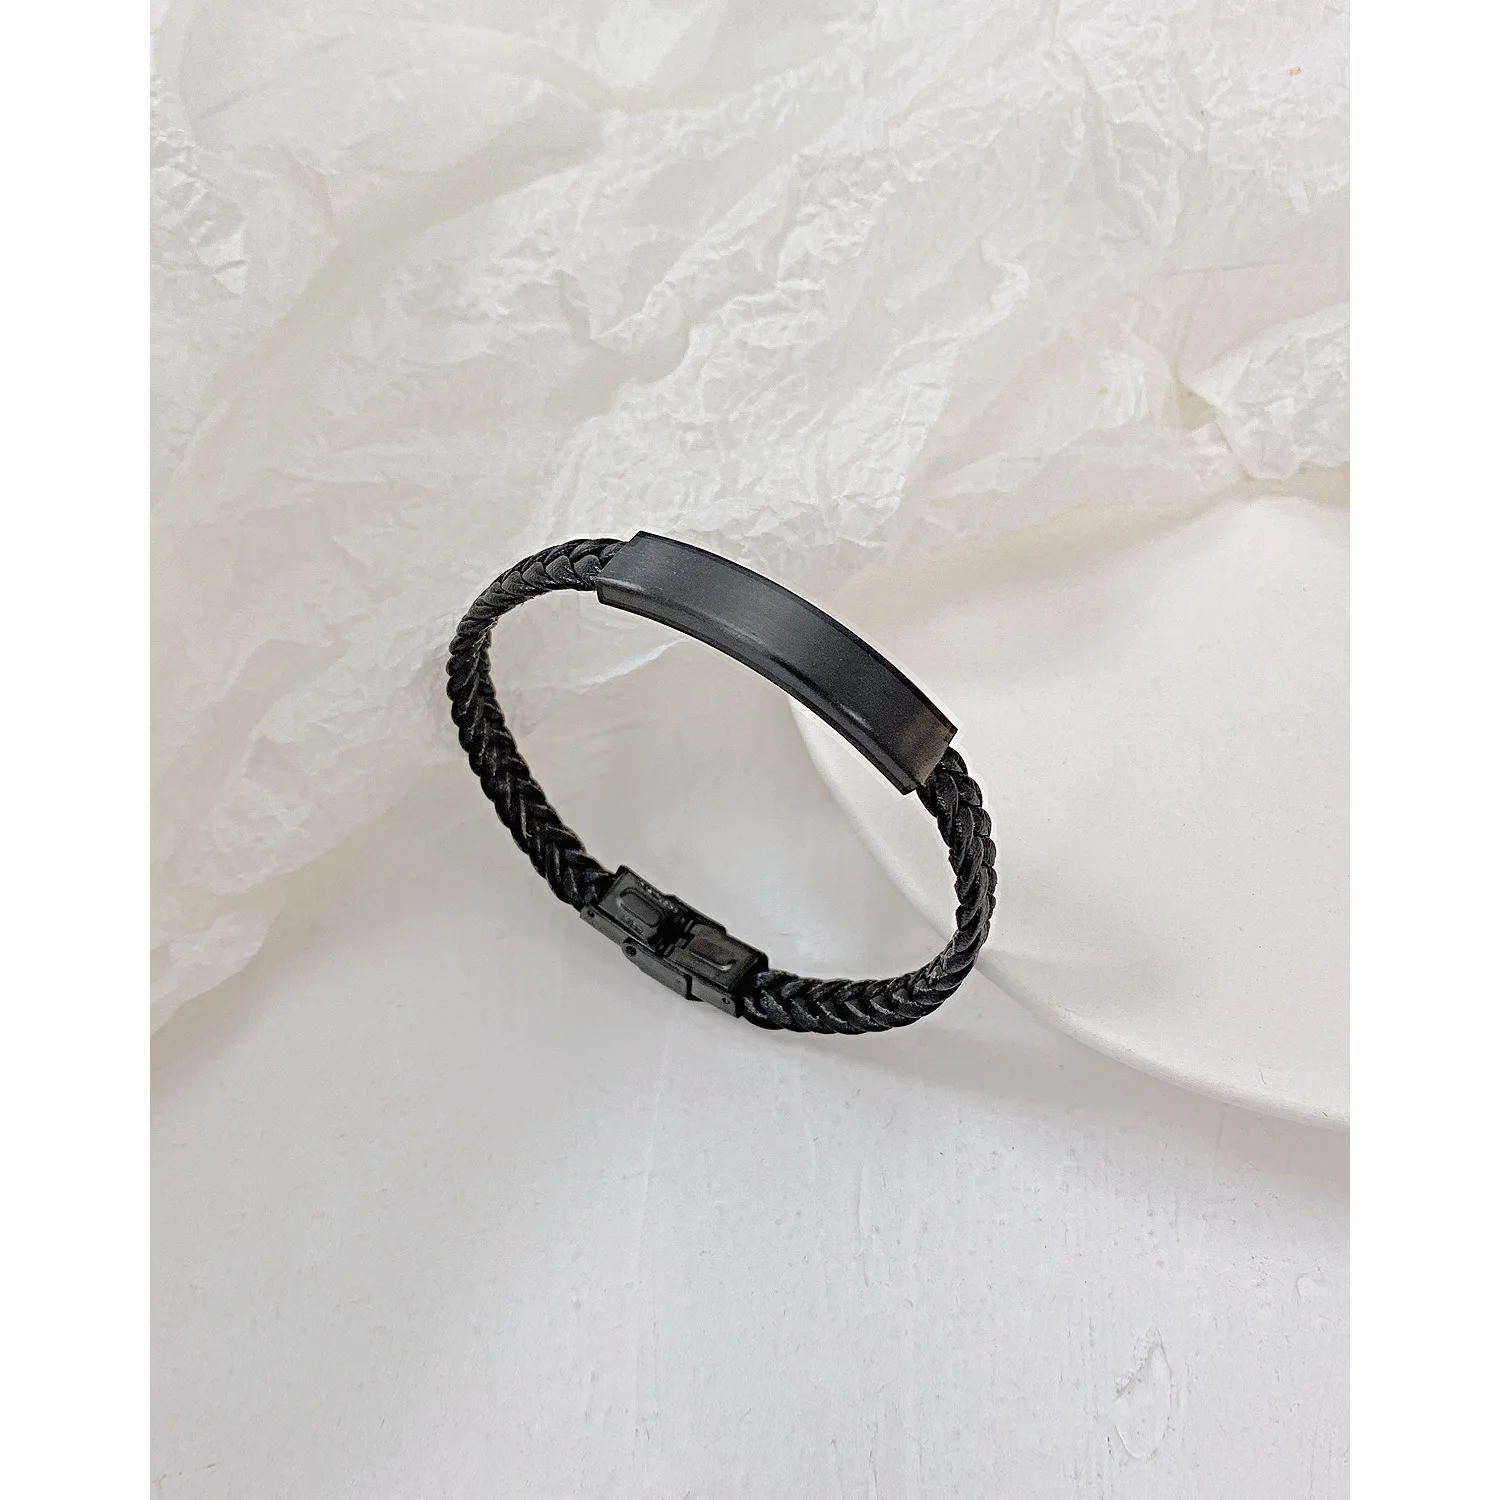 Hand Made Leather Bracelet With Metal Charm